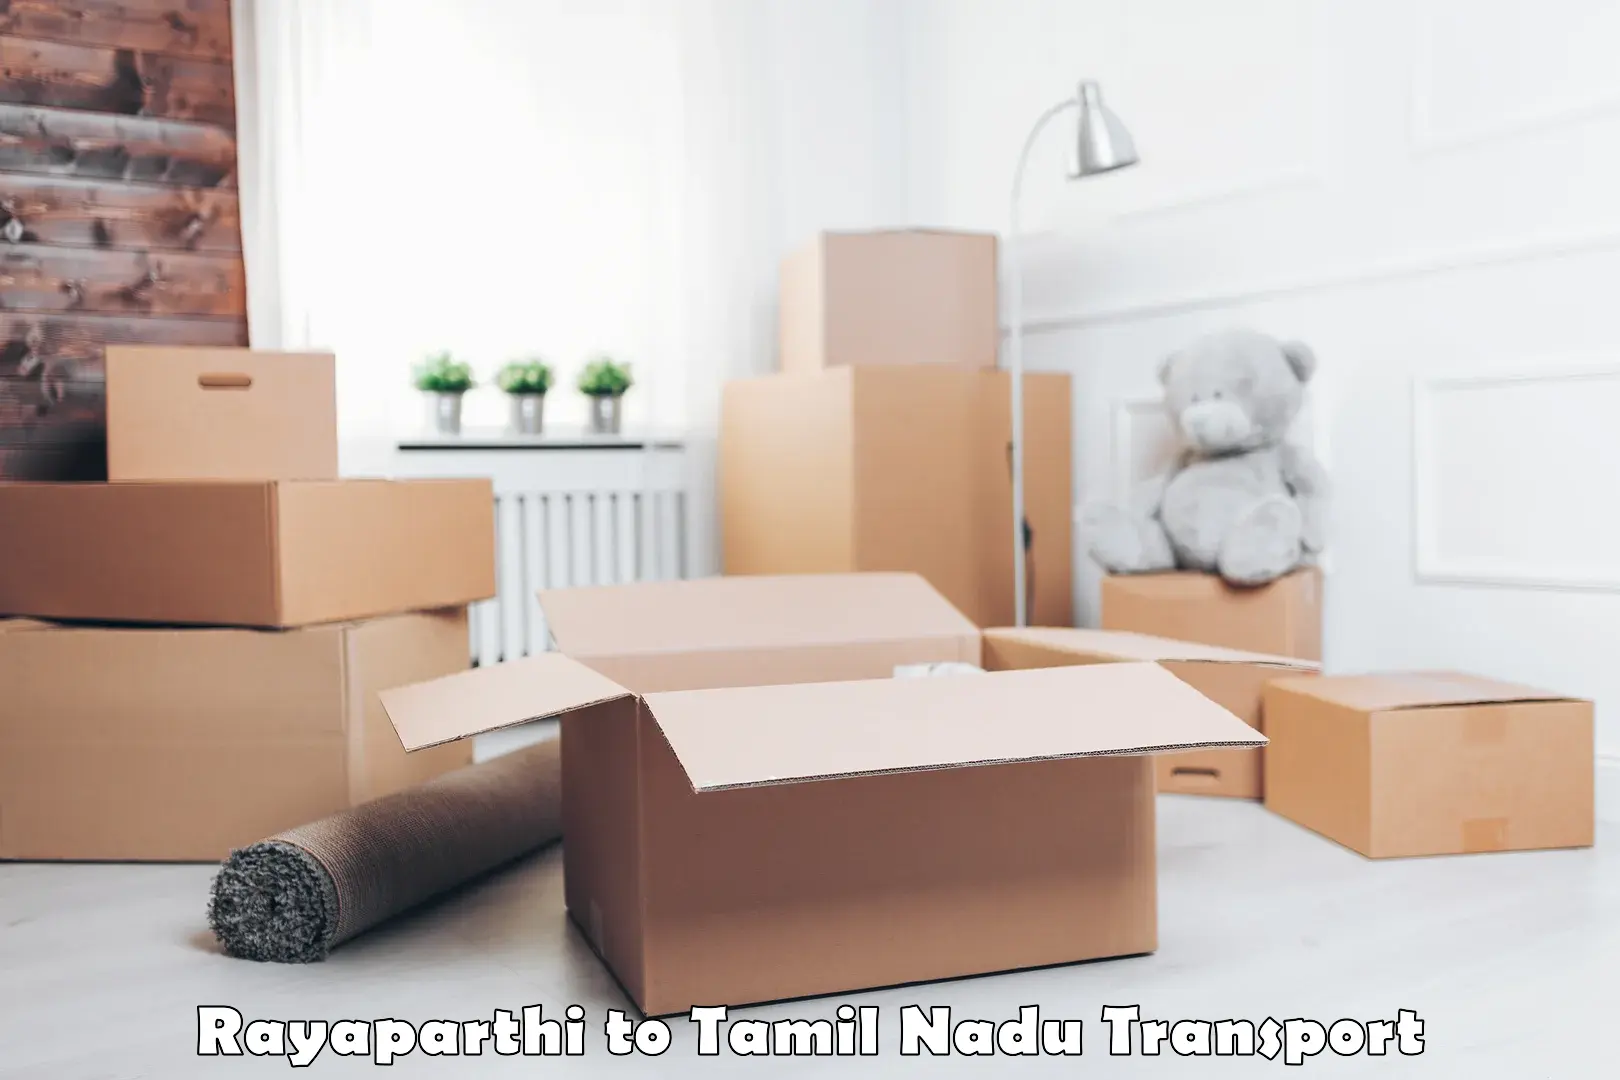 Daily parcel service transport in Rayaparthi to Pollachi